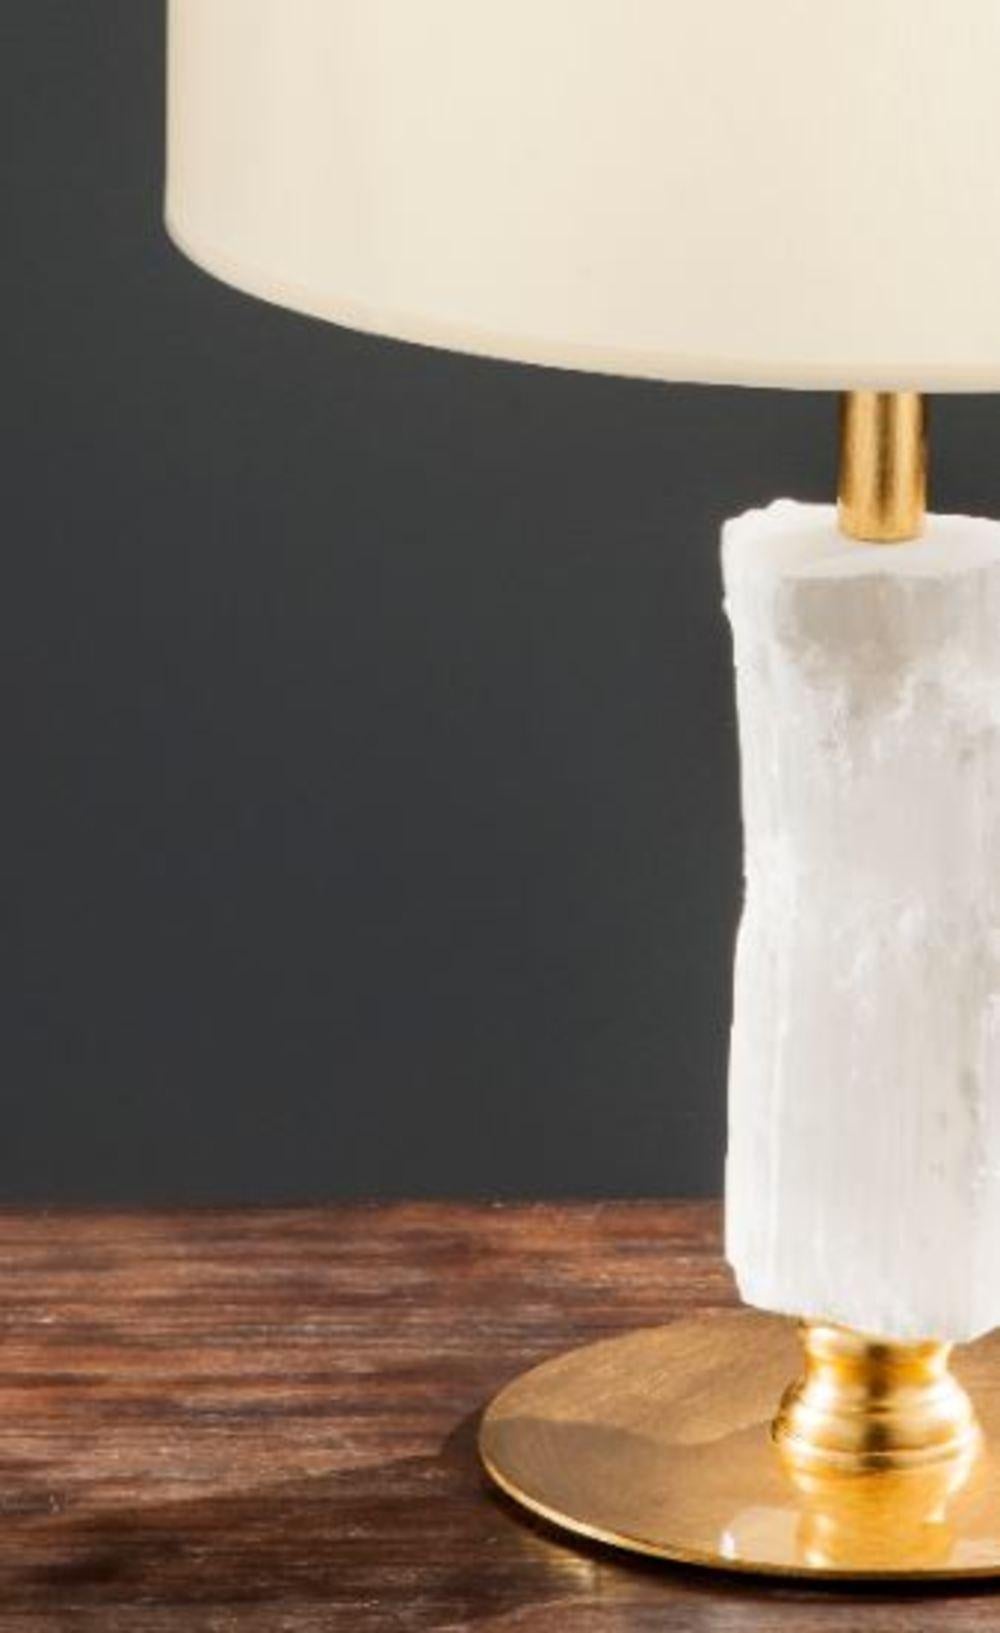 Selenite table lamp by Aver
Dimensions: 40 x 40 x 64cm
Materials: Aluminum and selenite

Designed by Marcele Muraro, it is made of natural stones and inspired by the city of Casablanca, which has a rich Art Deco architectural heritage. Straight and